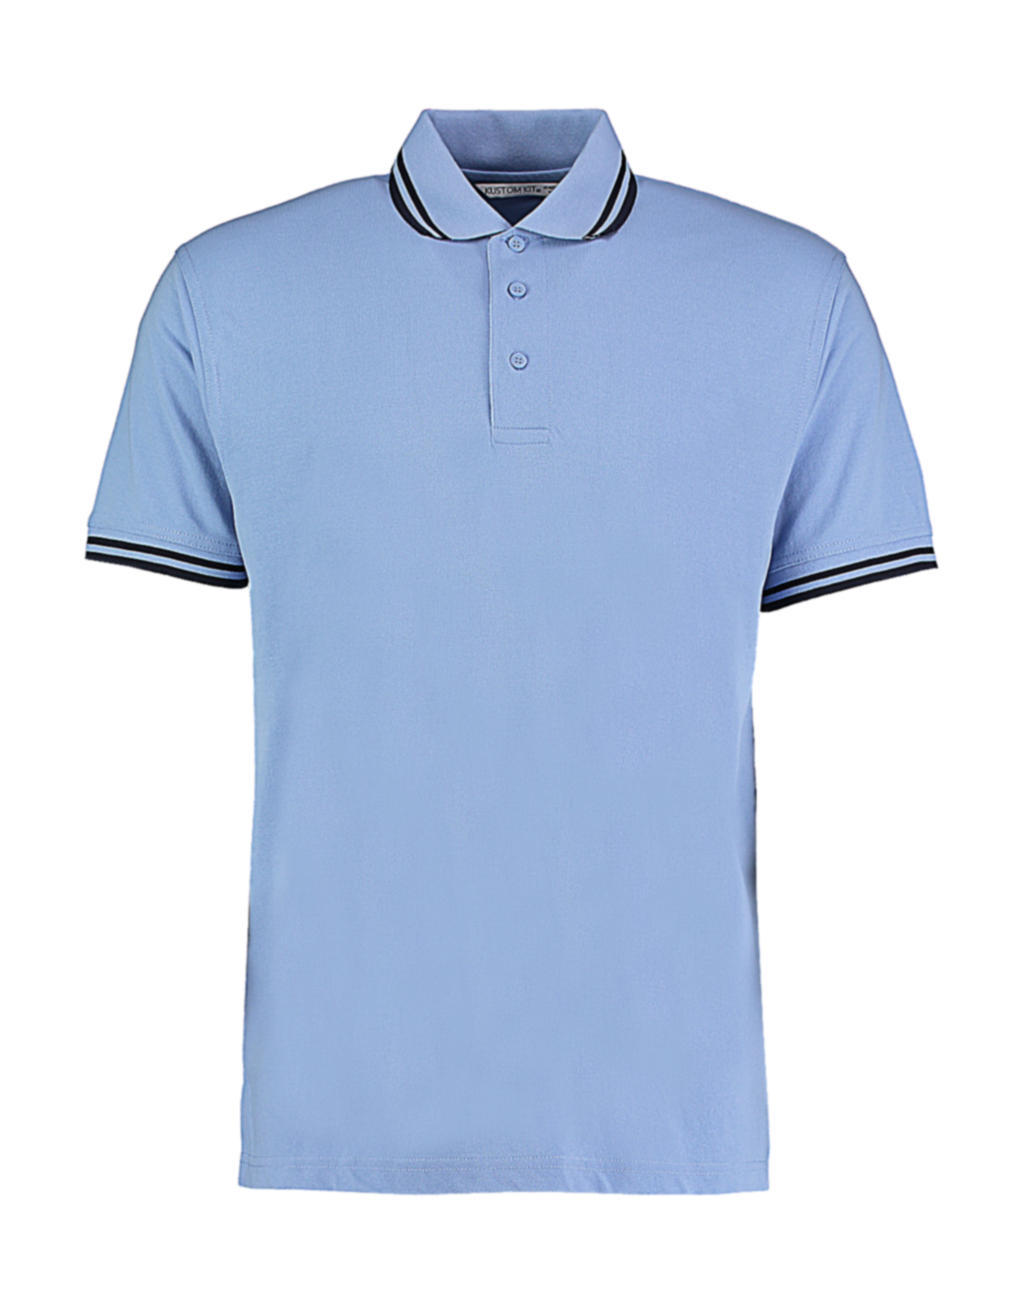  Classic Fit Tipped Collar Polo in Farbe Light Blue/Navy